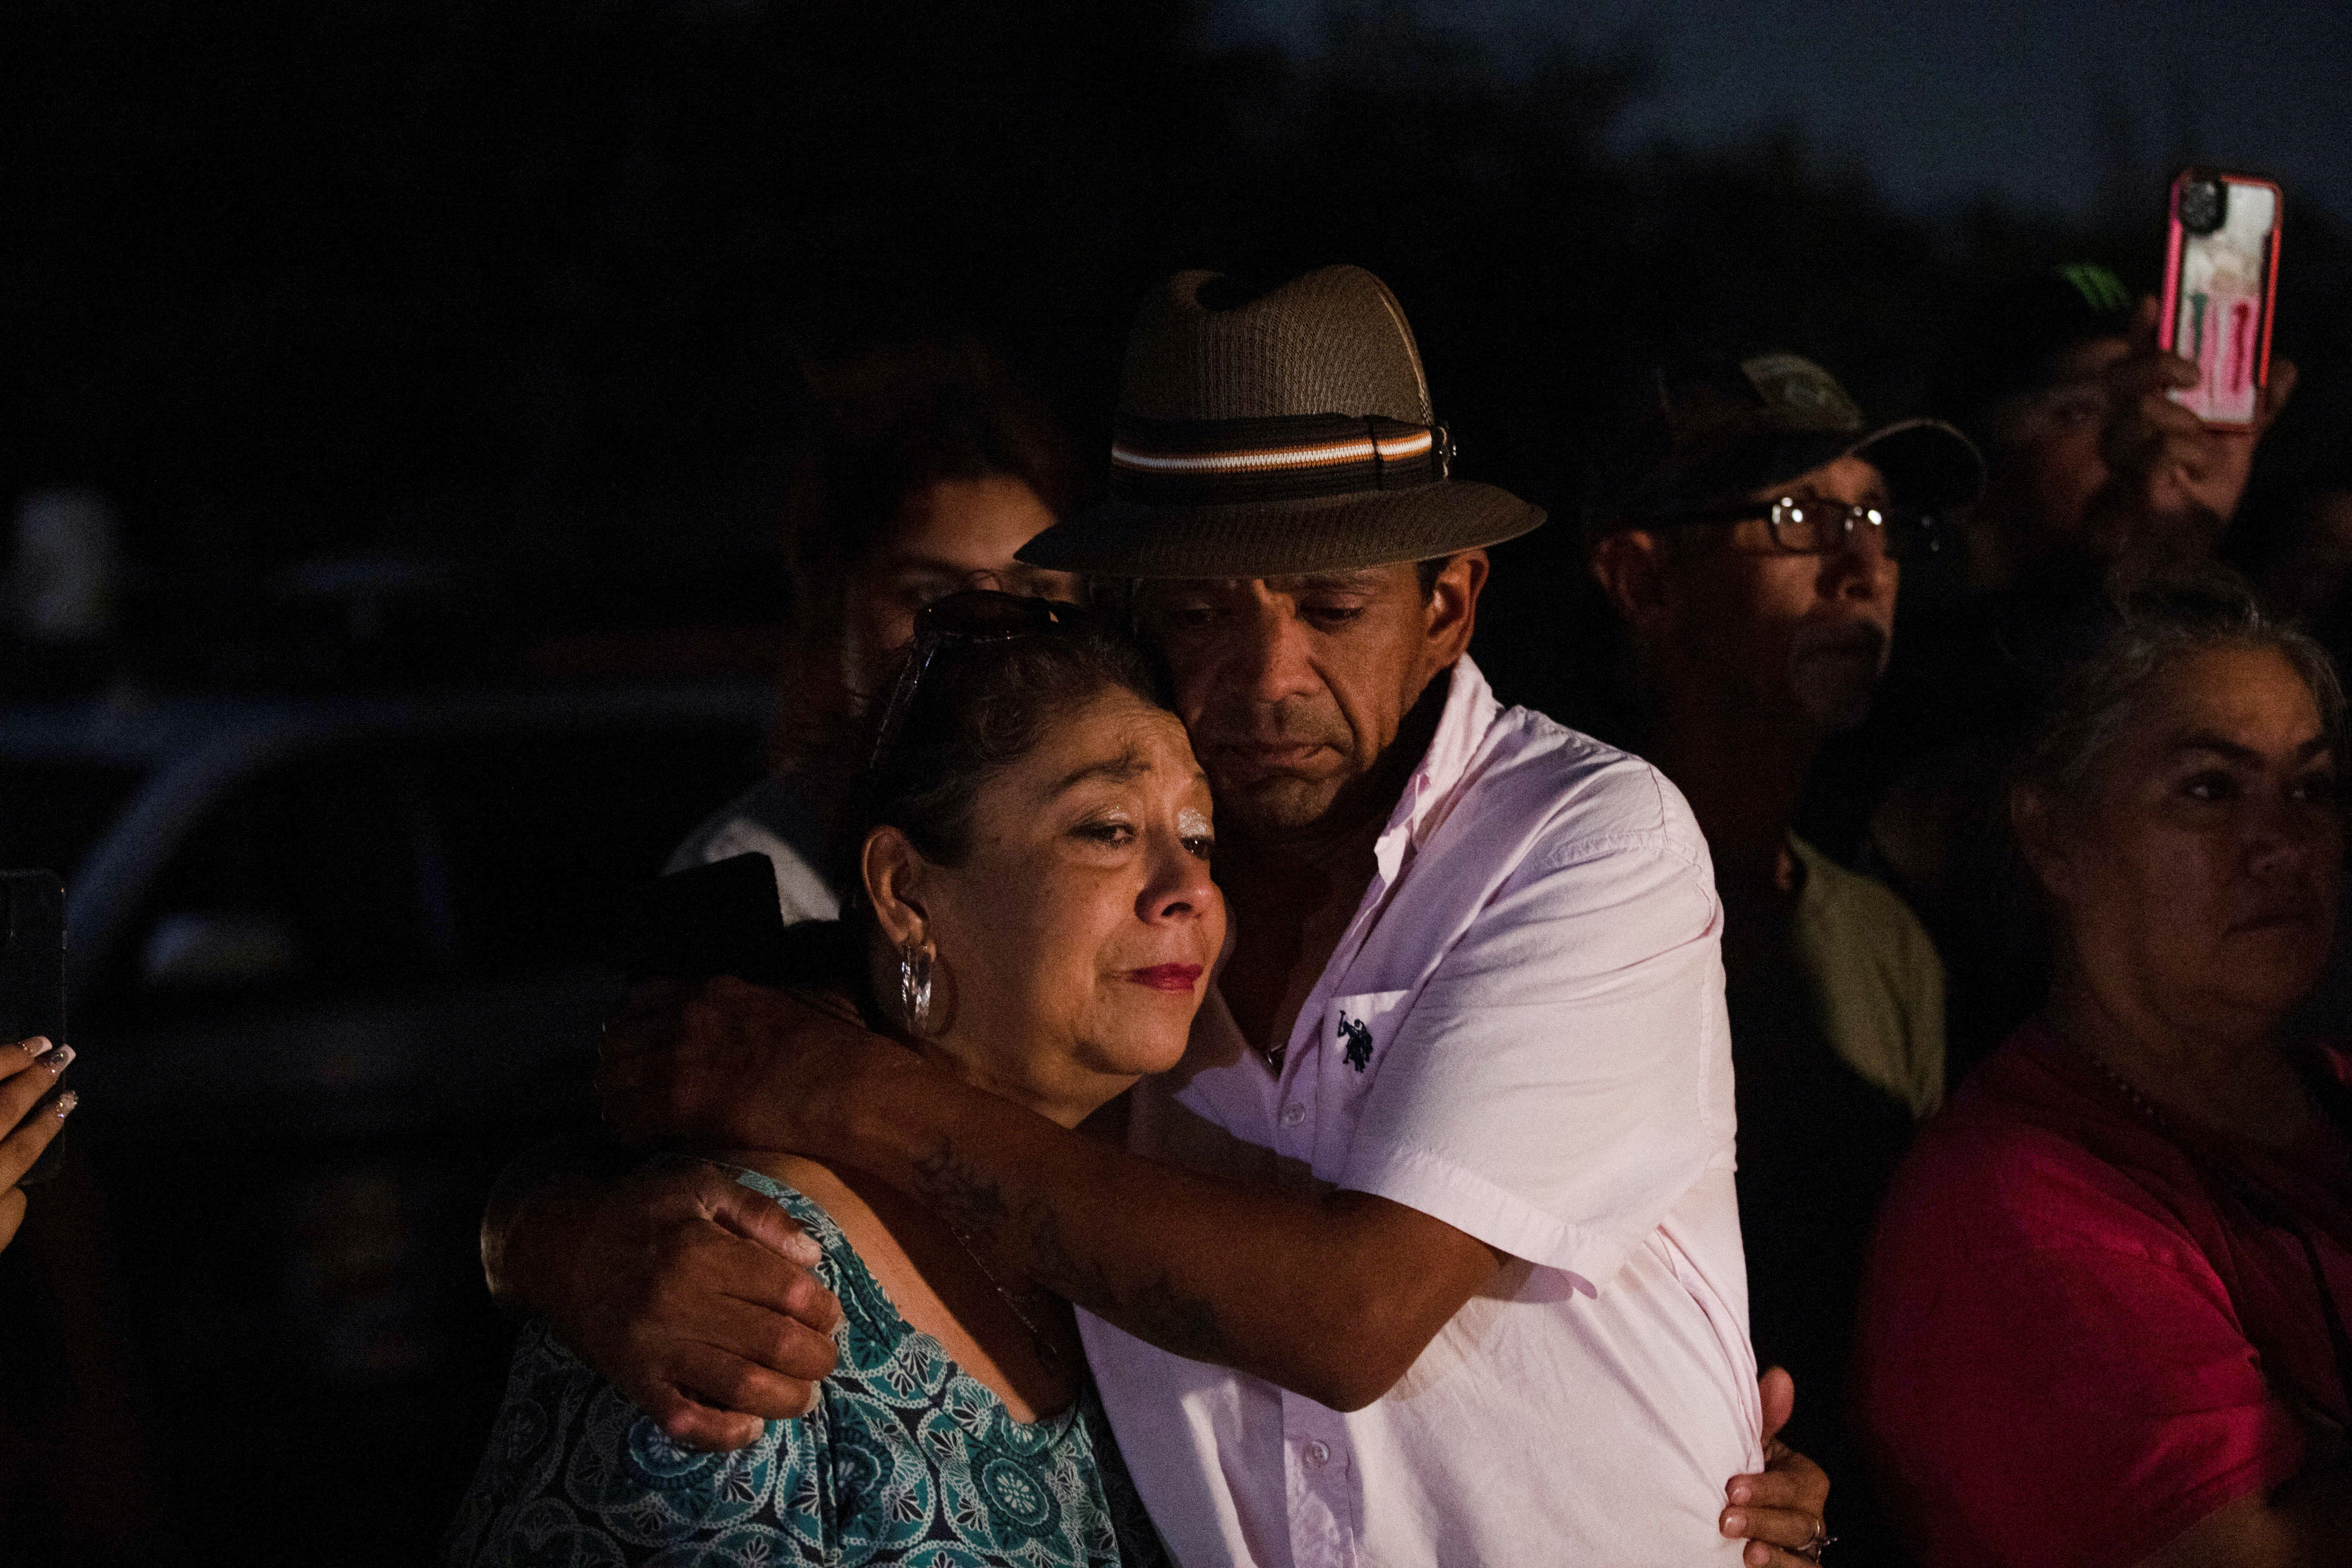 Christine and Michael Ybarra embrace at the scene where people were found dead inside a trailer truck in San Antonio, Texas, U.S. June 27, 2022. REUTERS/Kaylee Greenlee Beal     TPX IMAGES OF THE DAY